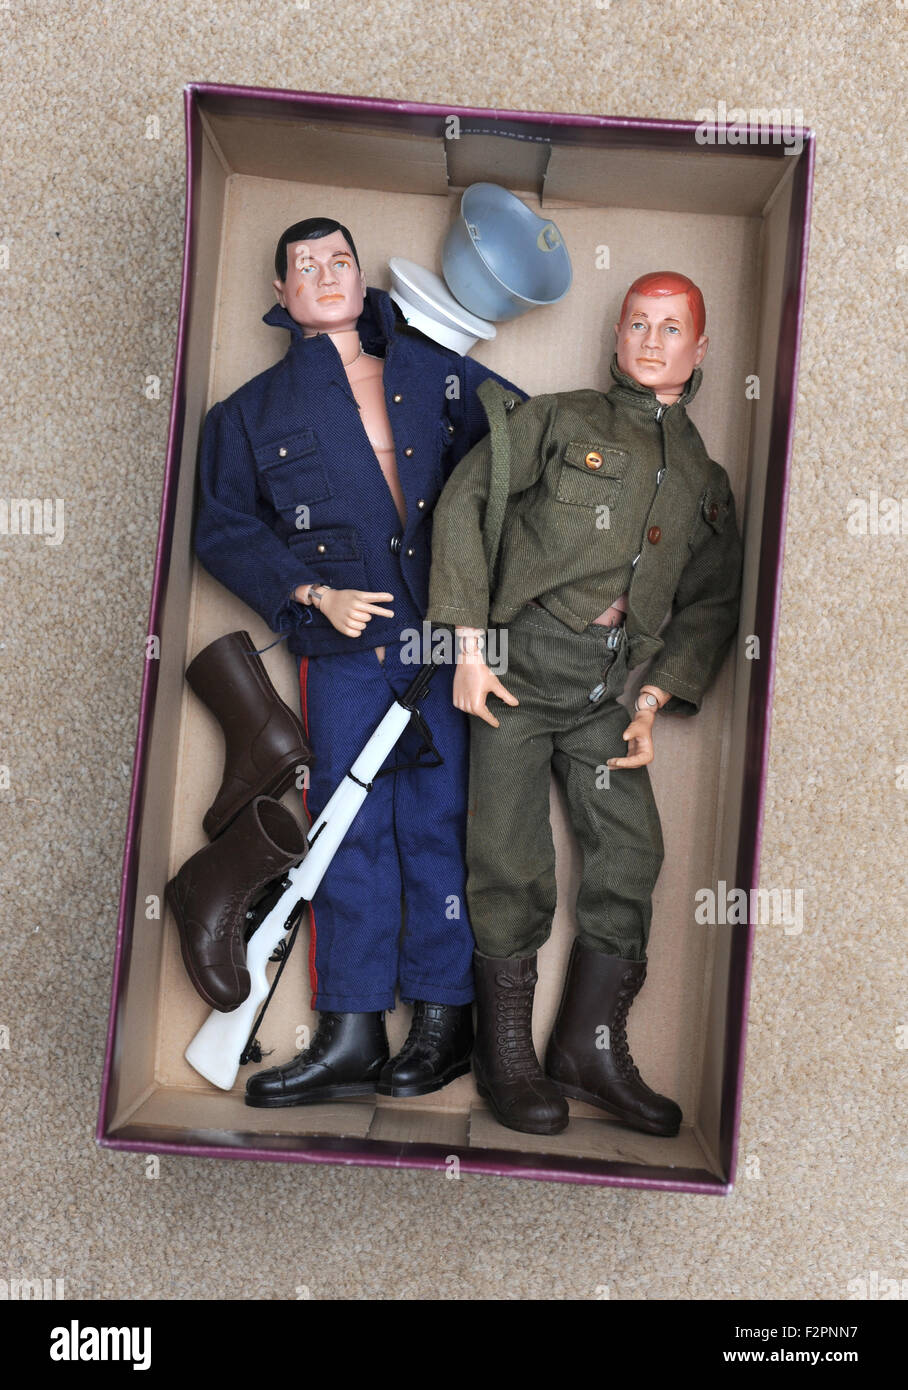 action man doll 1960s